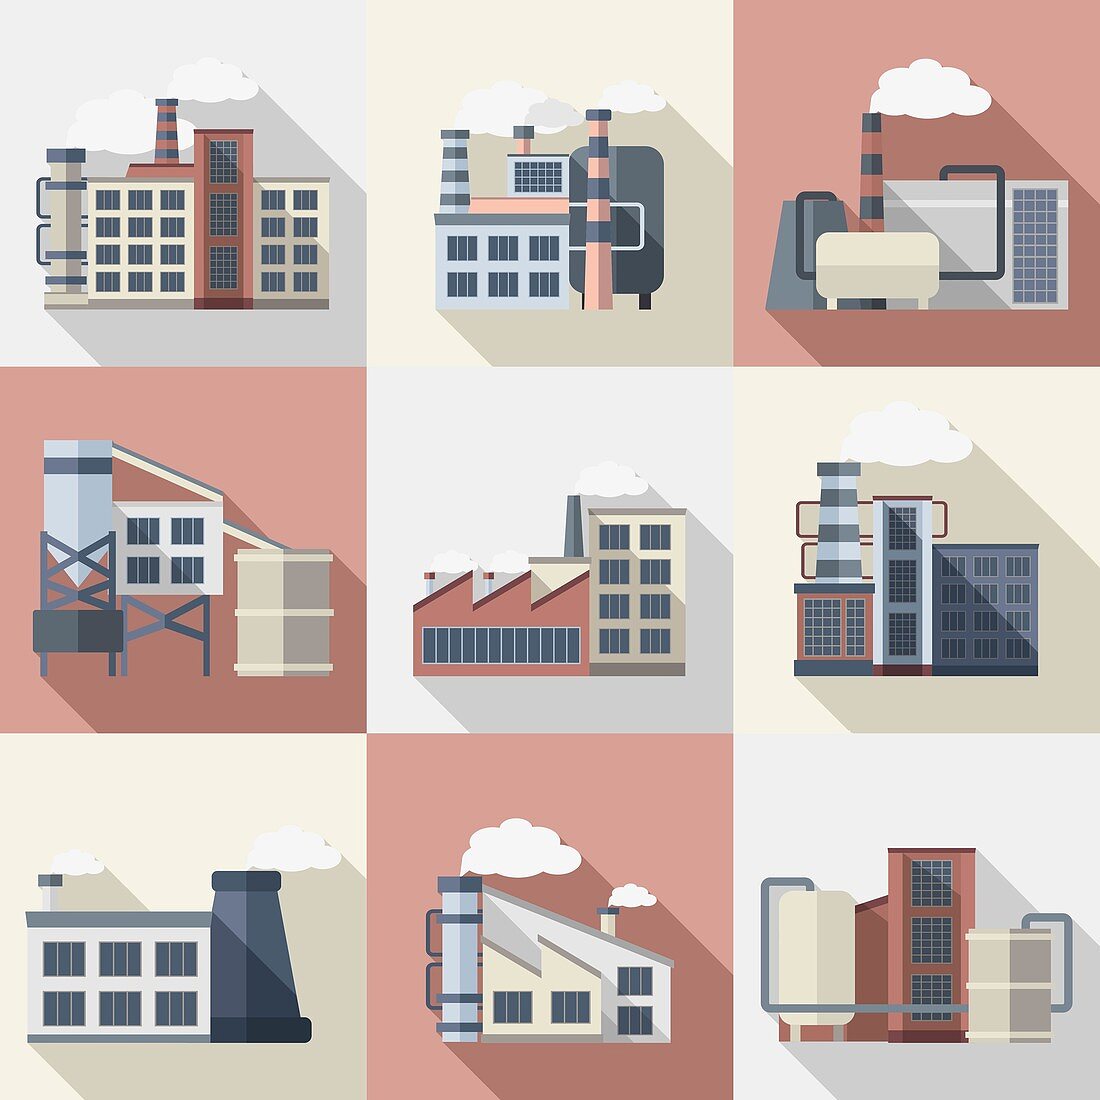 Industry icons, illustration